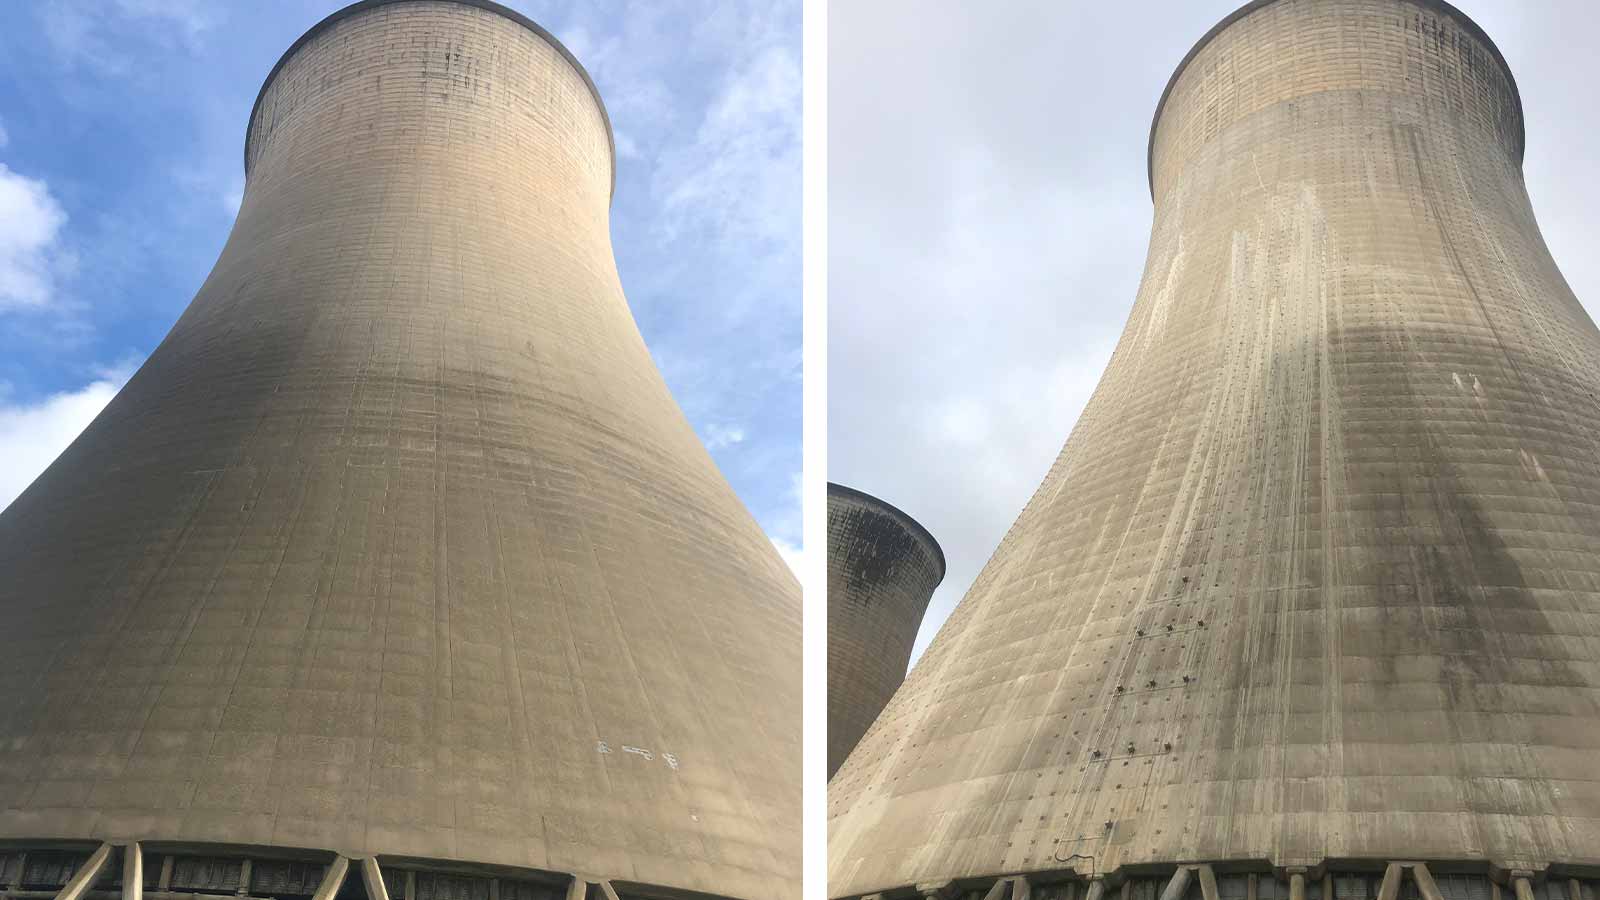 Huge coal plant cooling towers